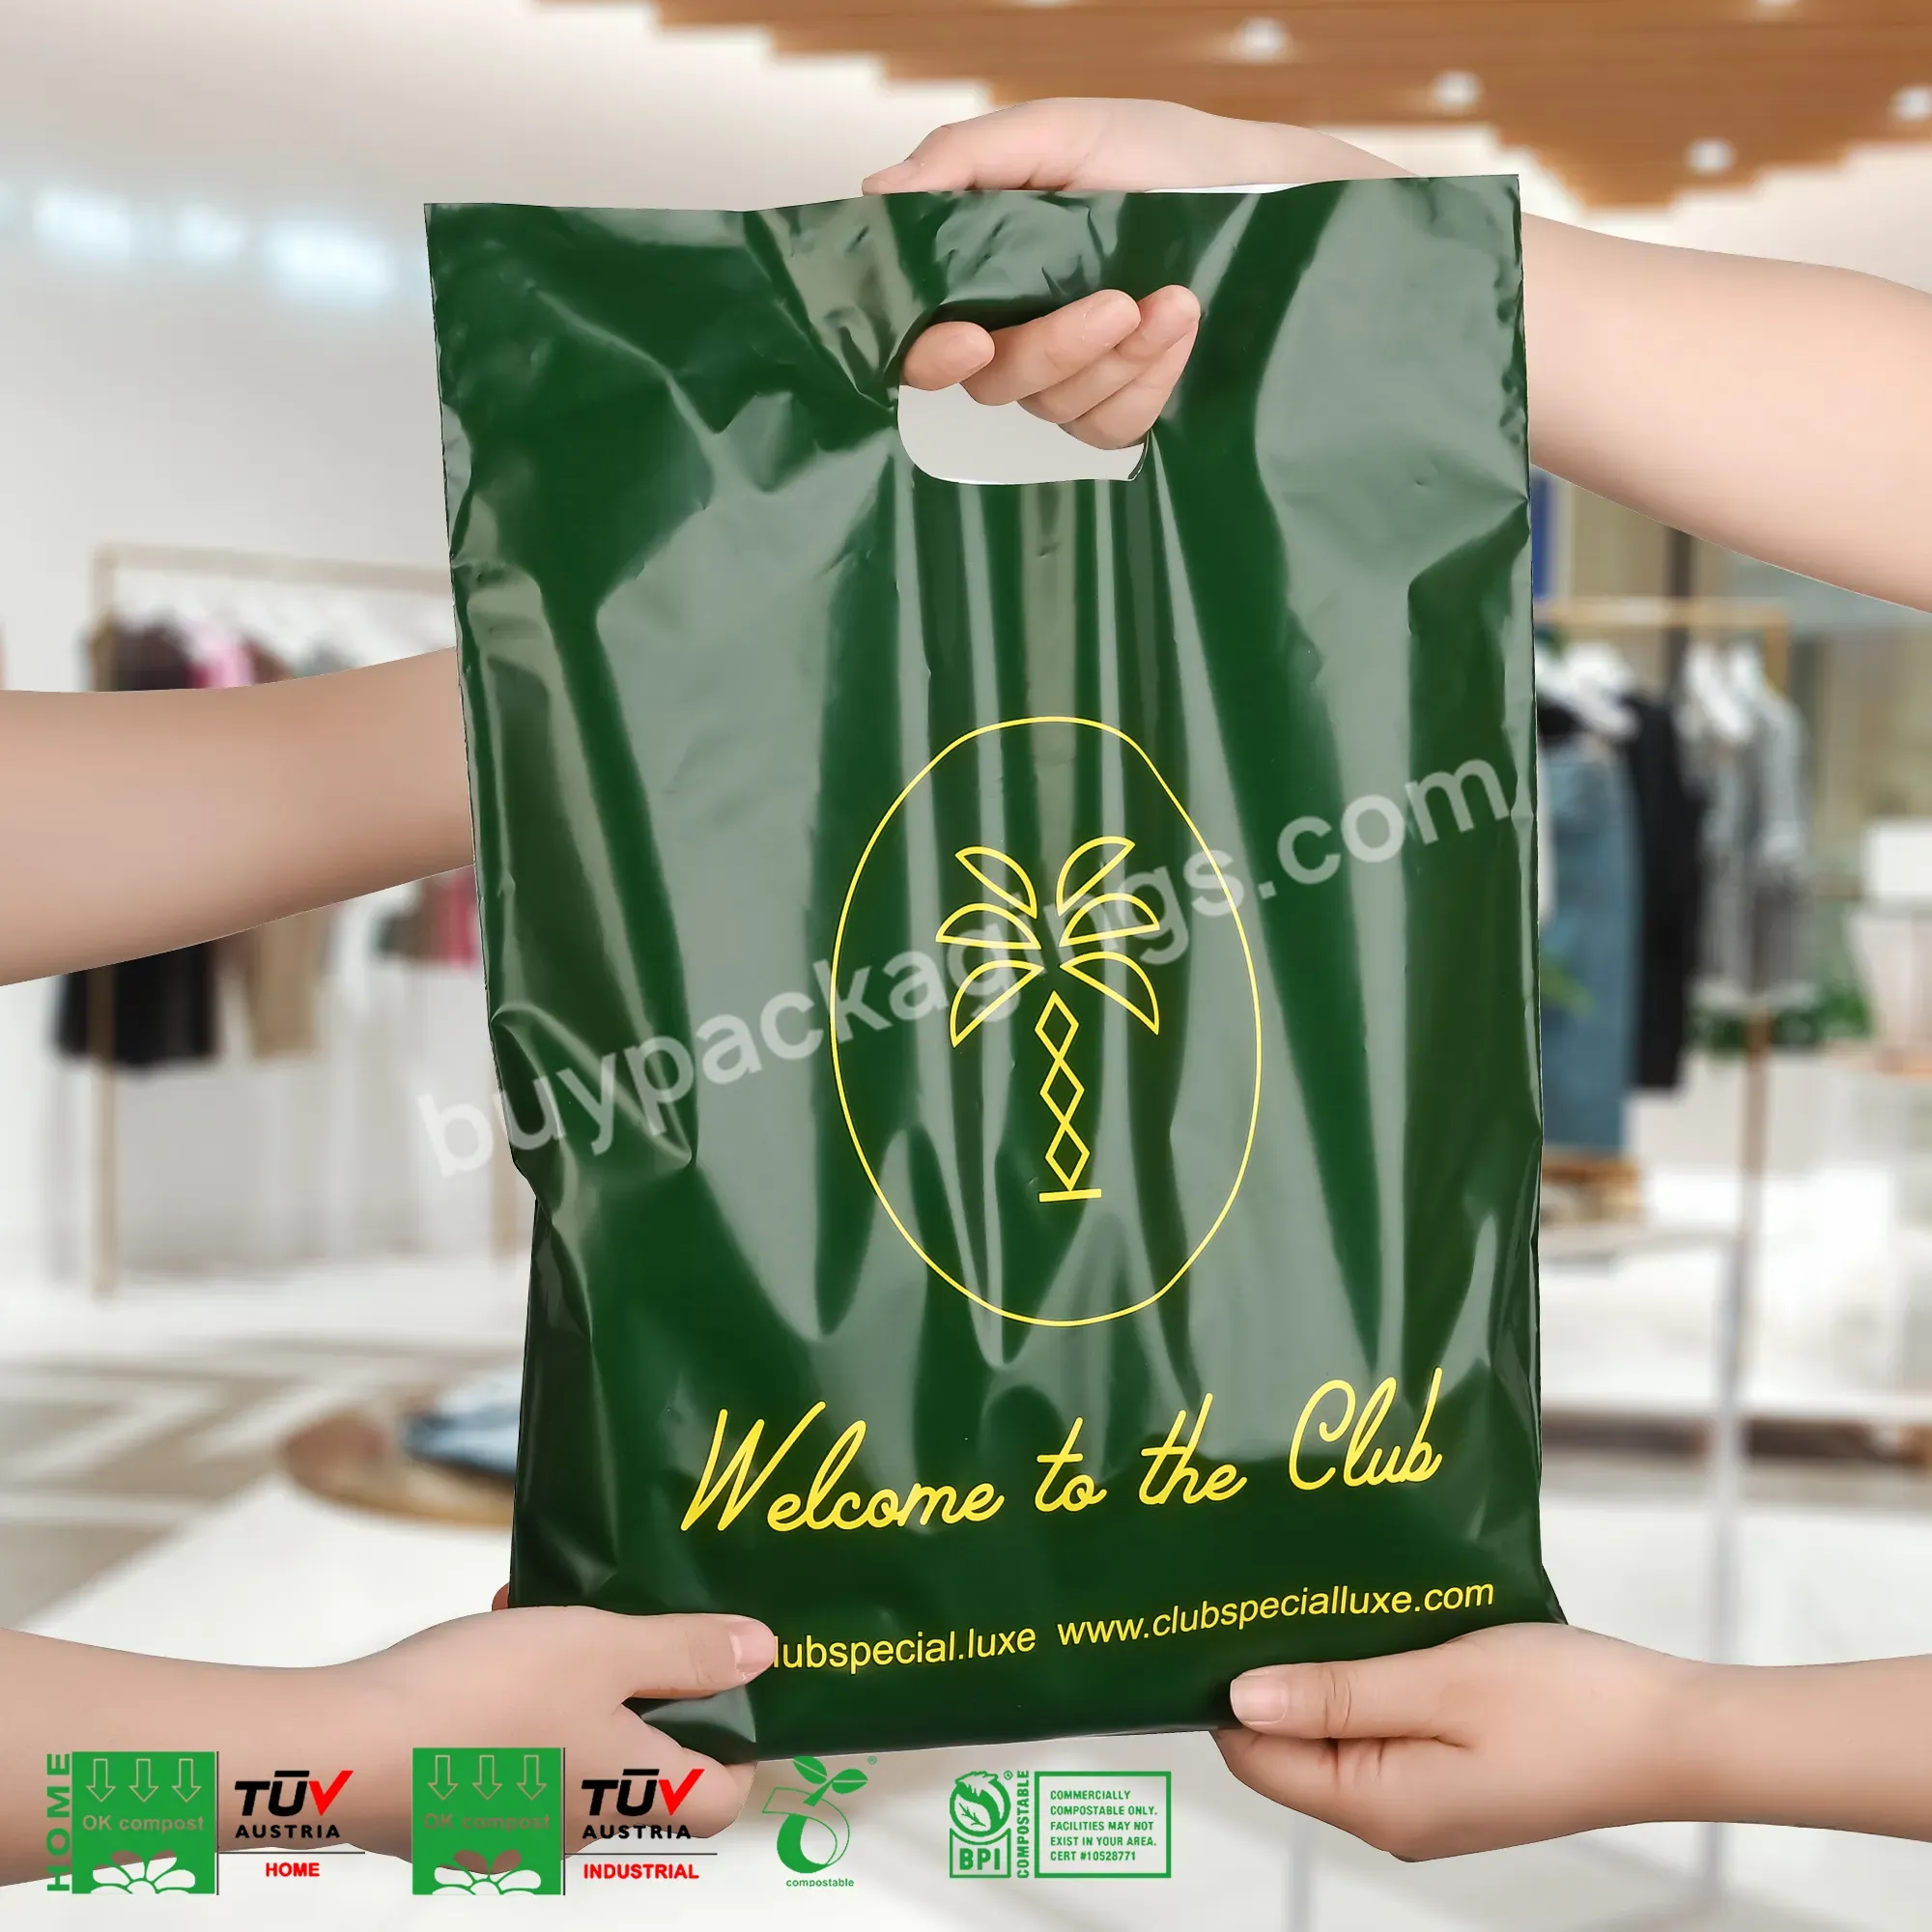 Wholesale Plastic Bags Waterproof Tote Shopping Bag Tear Resistant Biodegradable Bag With Recyclable Raw Material - Buy Bag Plastic,Tote Shopping Bag,Biodegradable Bag Raw Material.